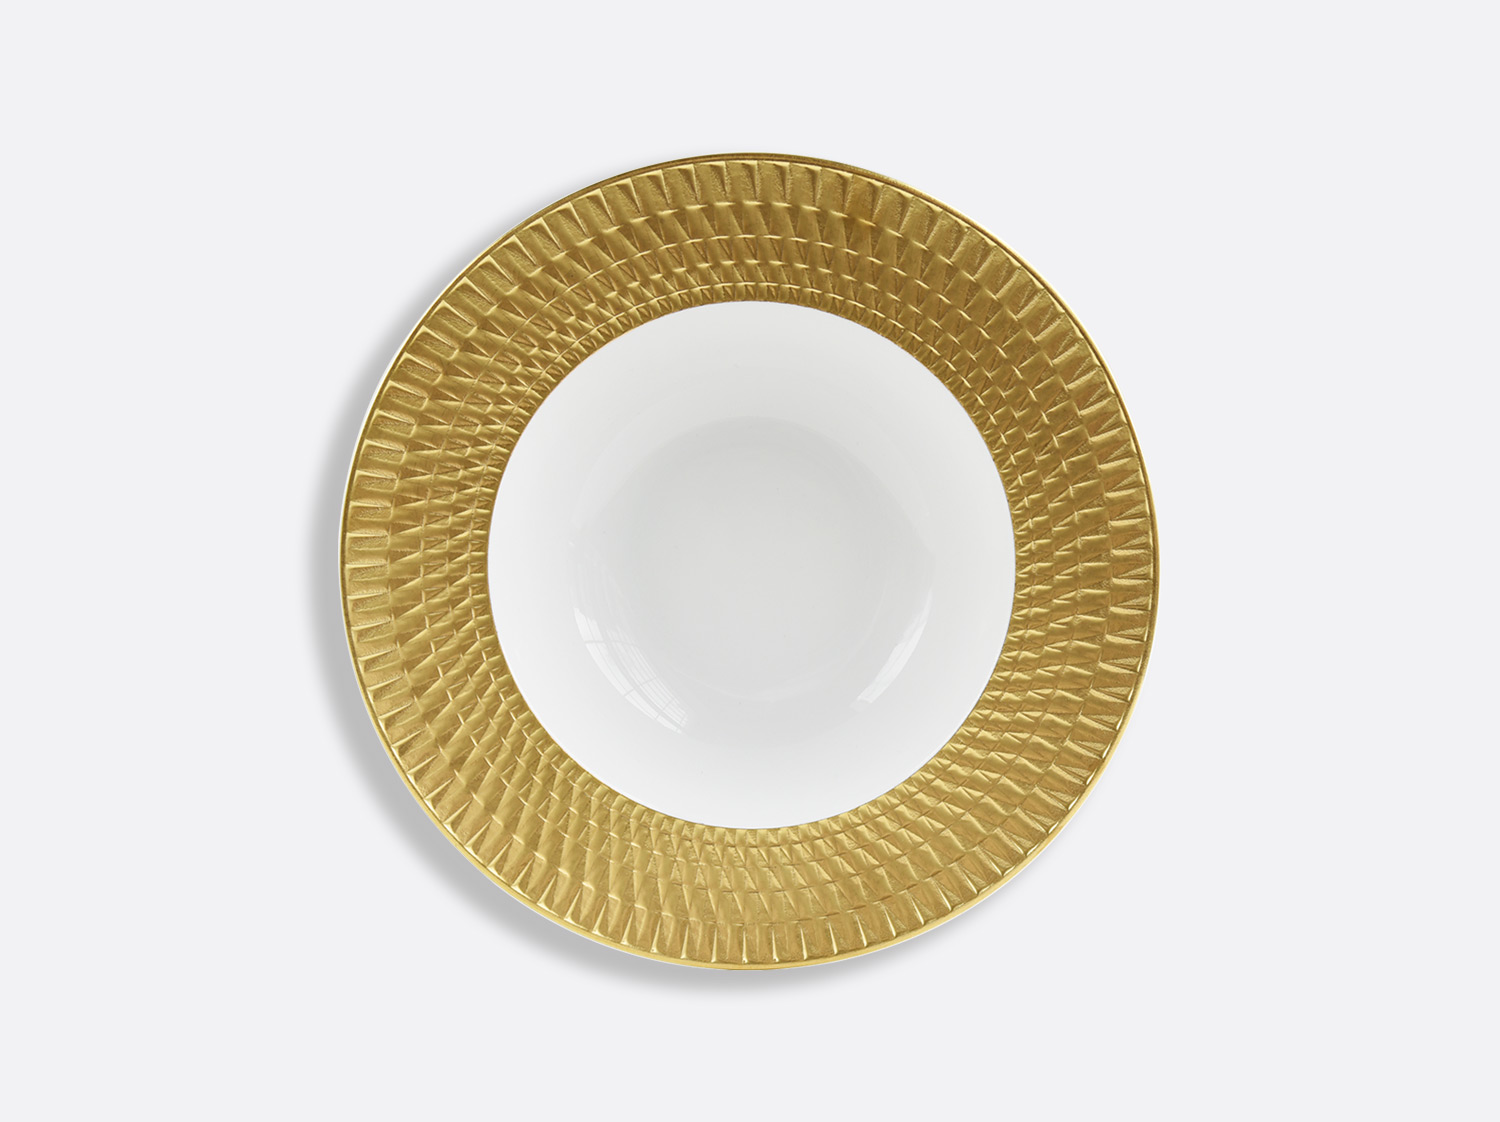 China Rim soup of the collection Twist or | Bernardaud